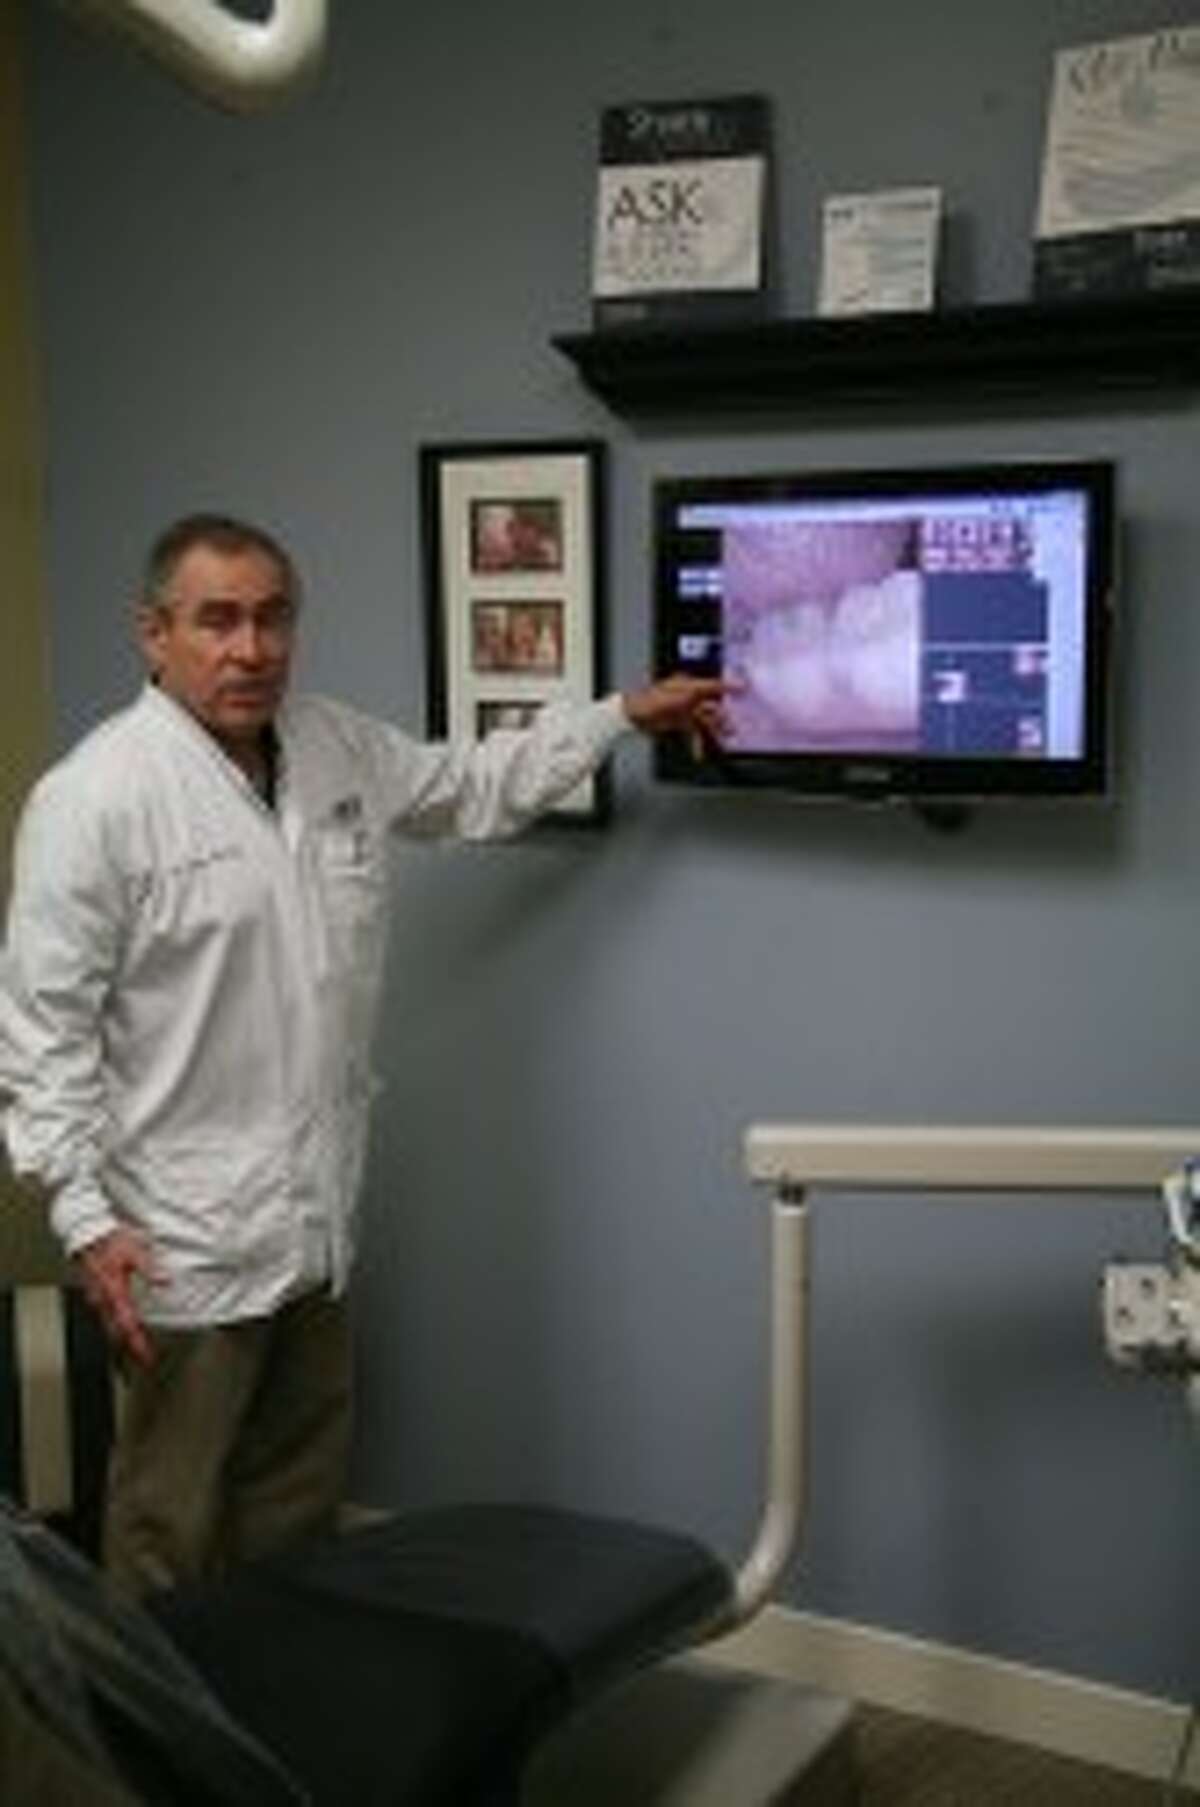 NEW LOCATION: Dr. Bob Scharp talks about the equipment at Big Rapids Dental Health Care’s new downtown location. The dental office reopened at its new location on Jan. 7.